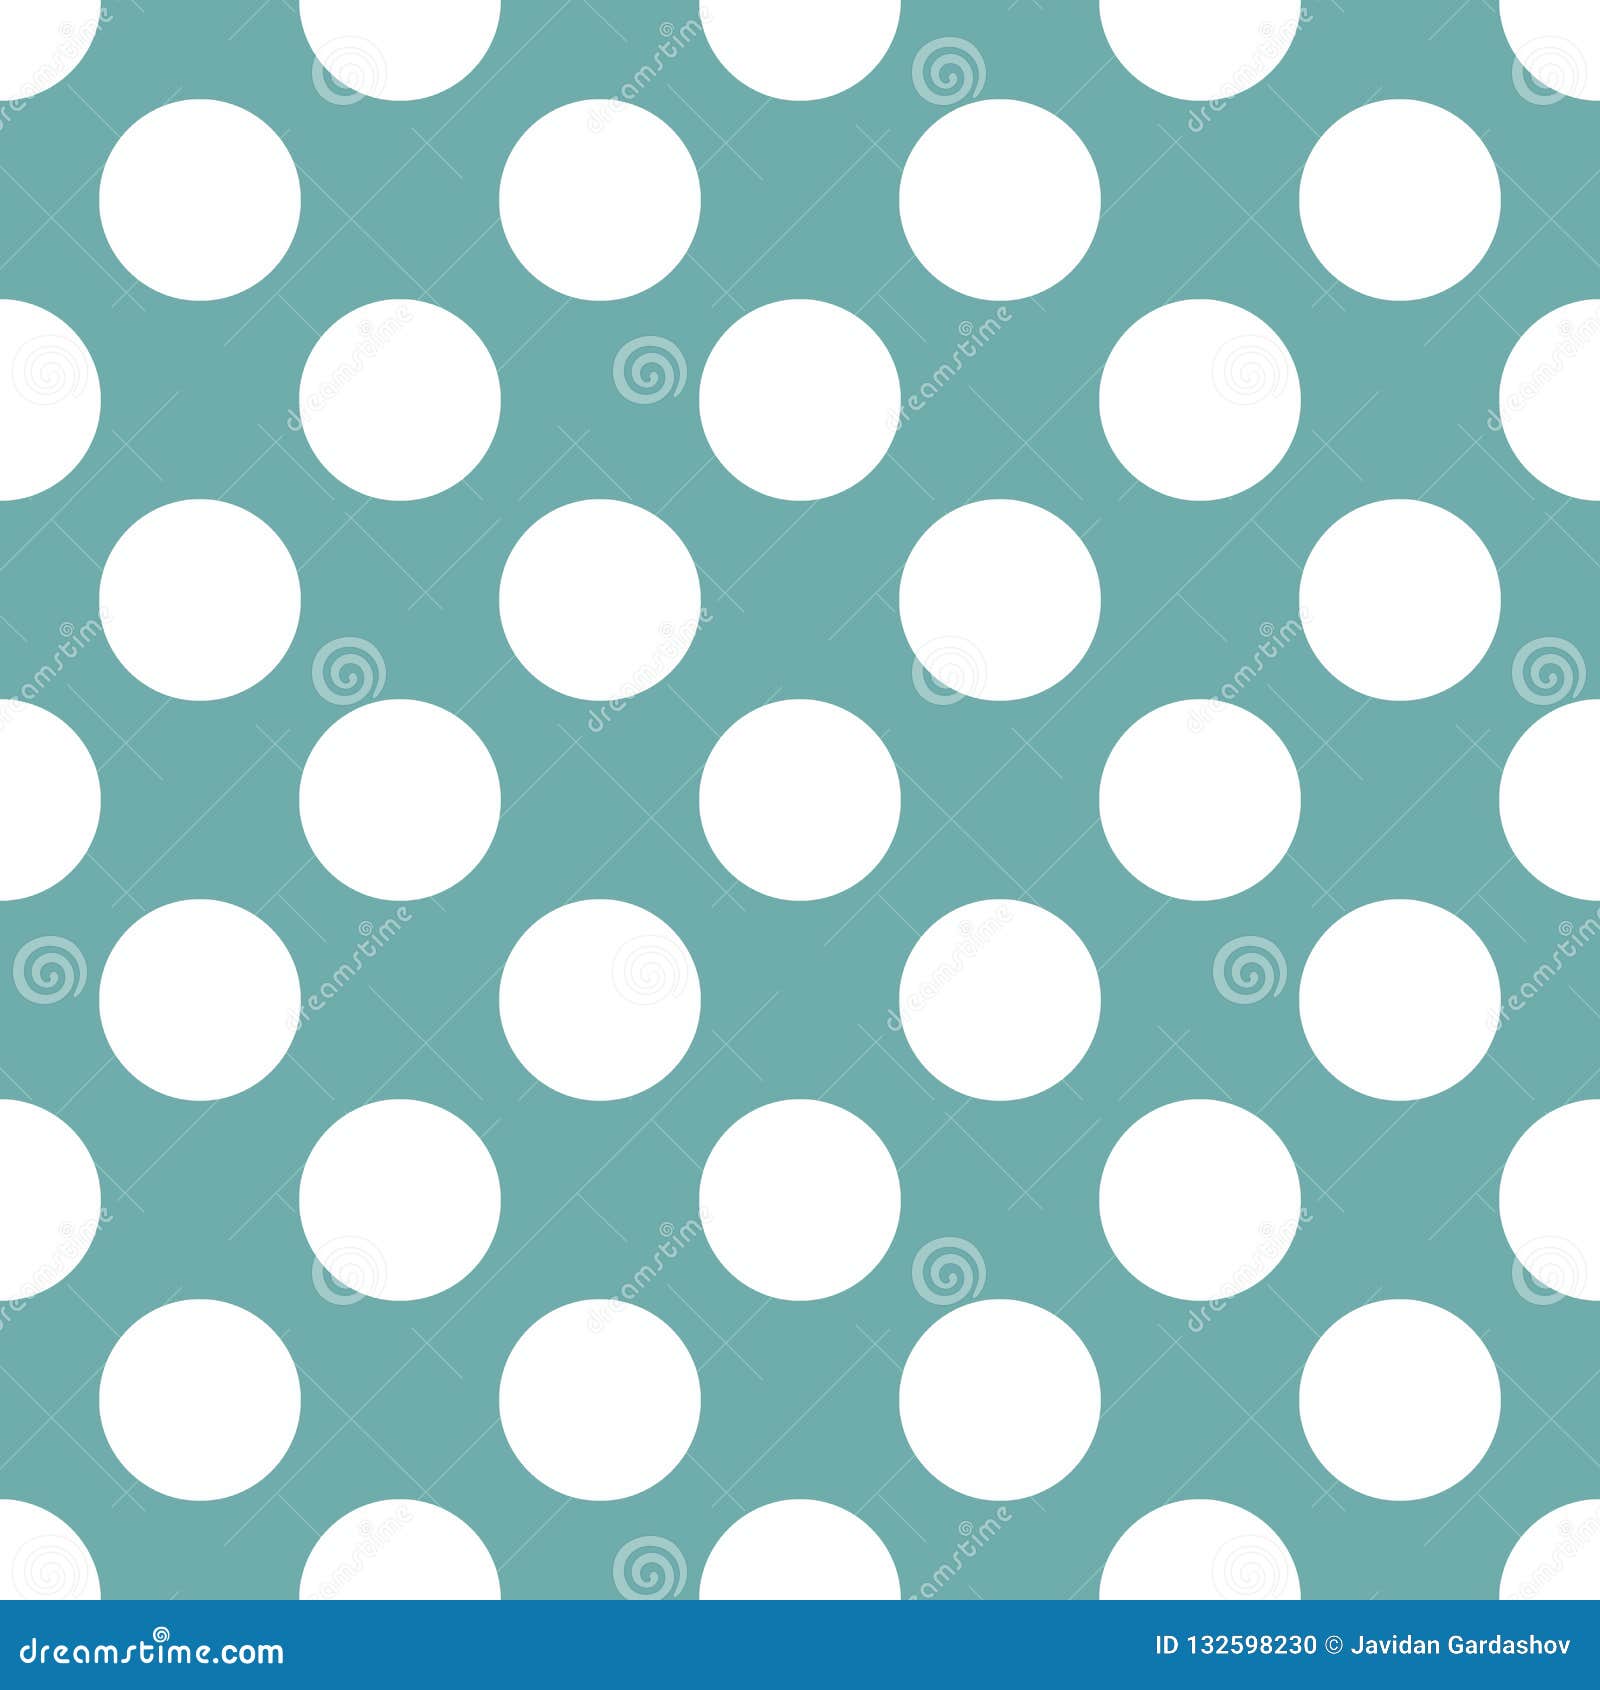 Abstract Blue Polka Dot Background Pattern. Vector Image Stock ...